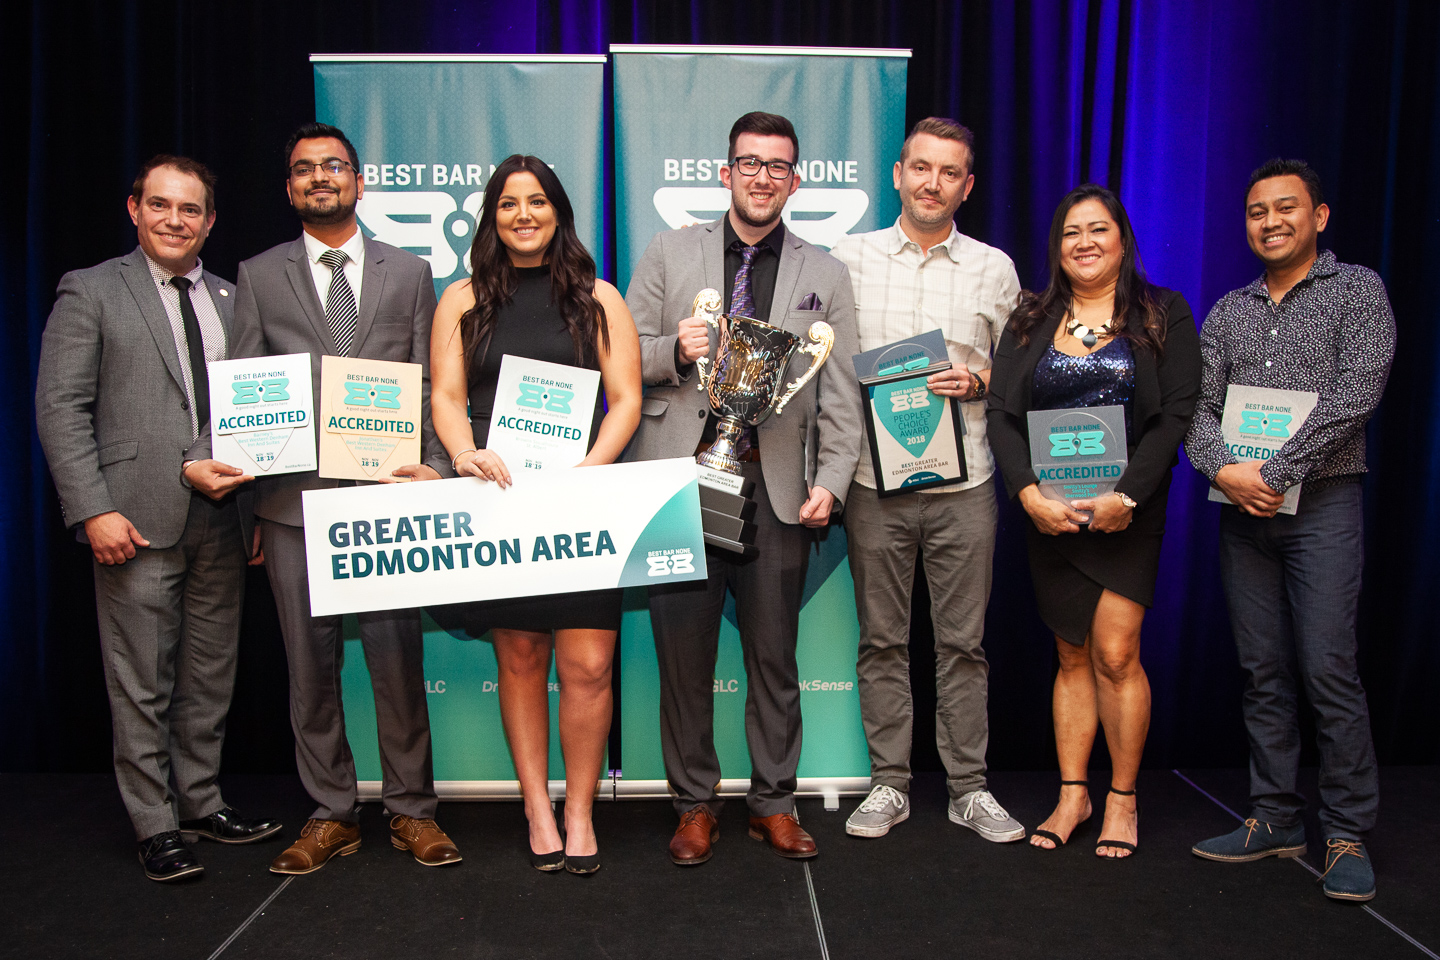 Kudos to all the bars awarded in our brand new category: Greater Edmonton Area